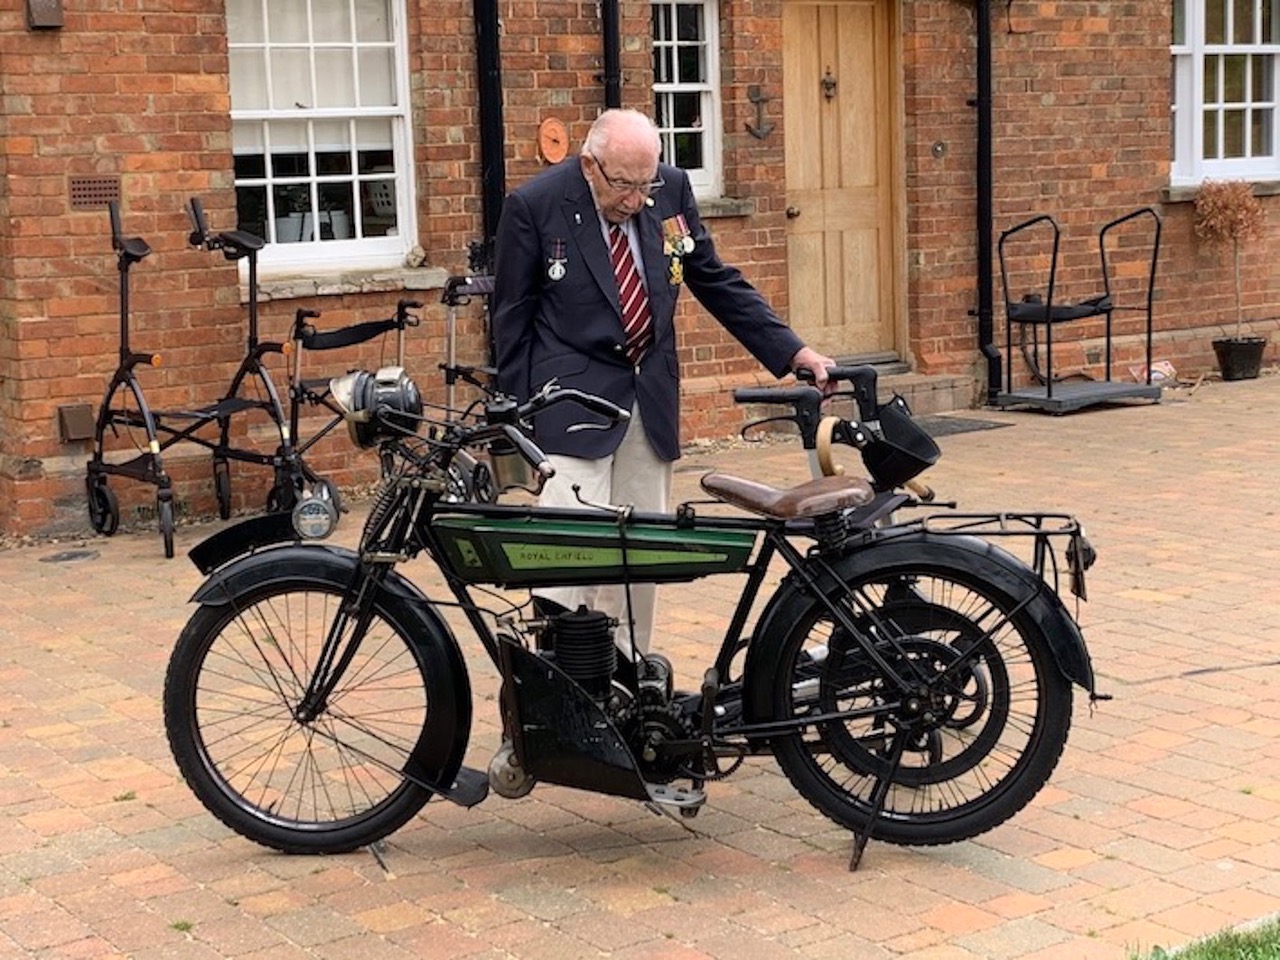 Captain Tom Moore and the Royal Enfield Model 200